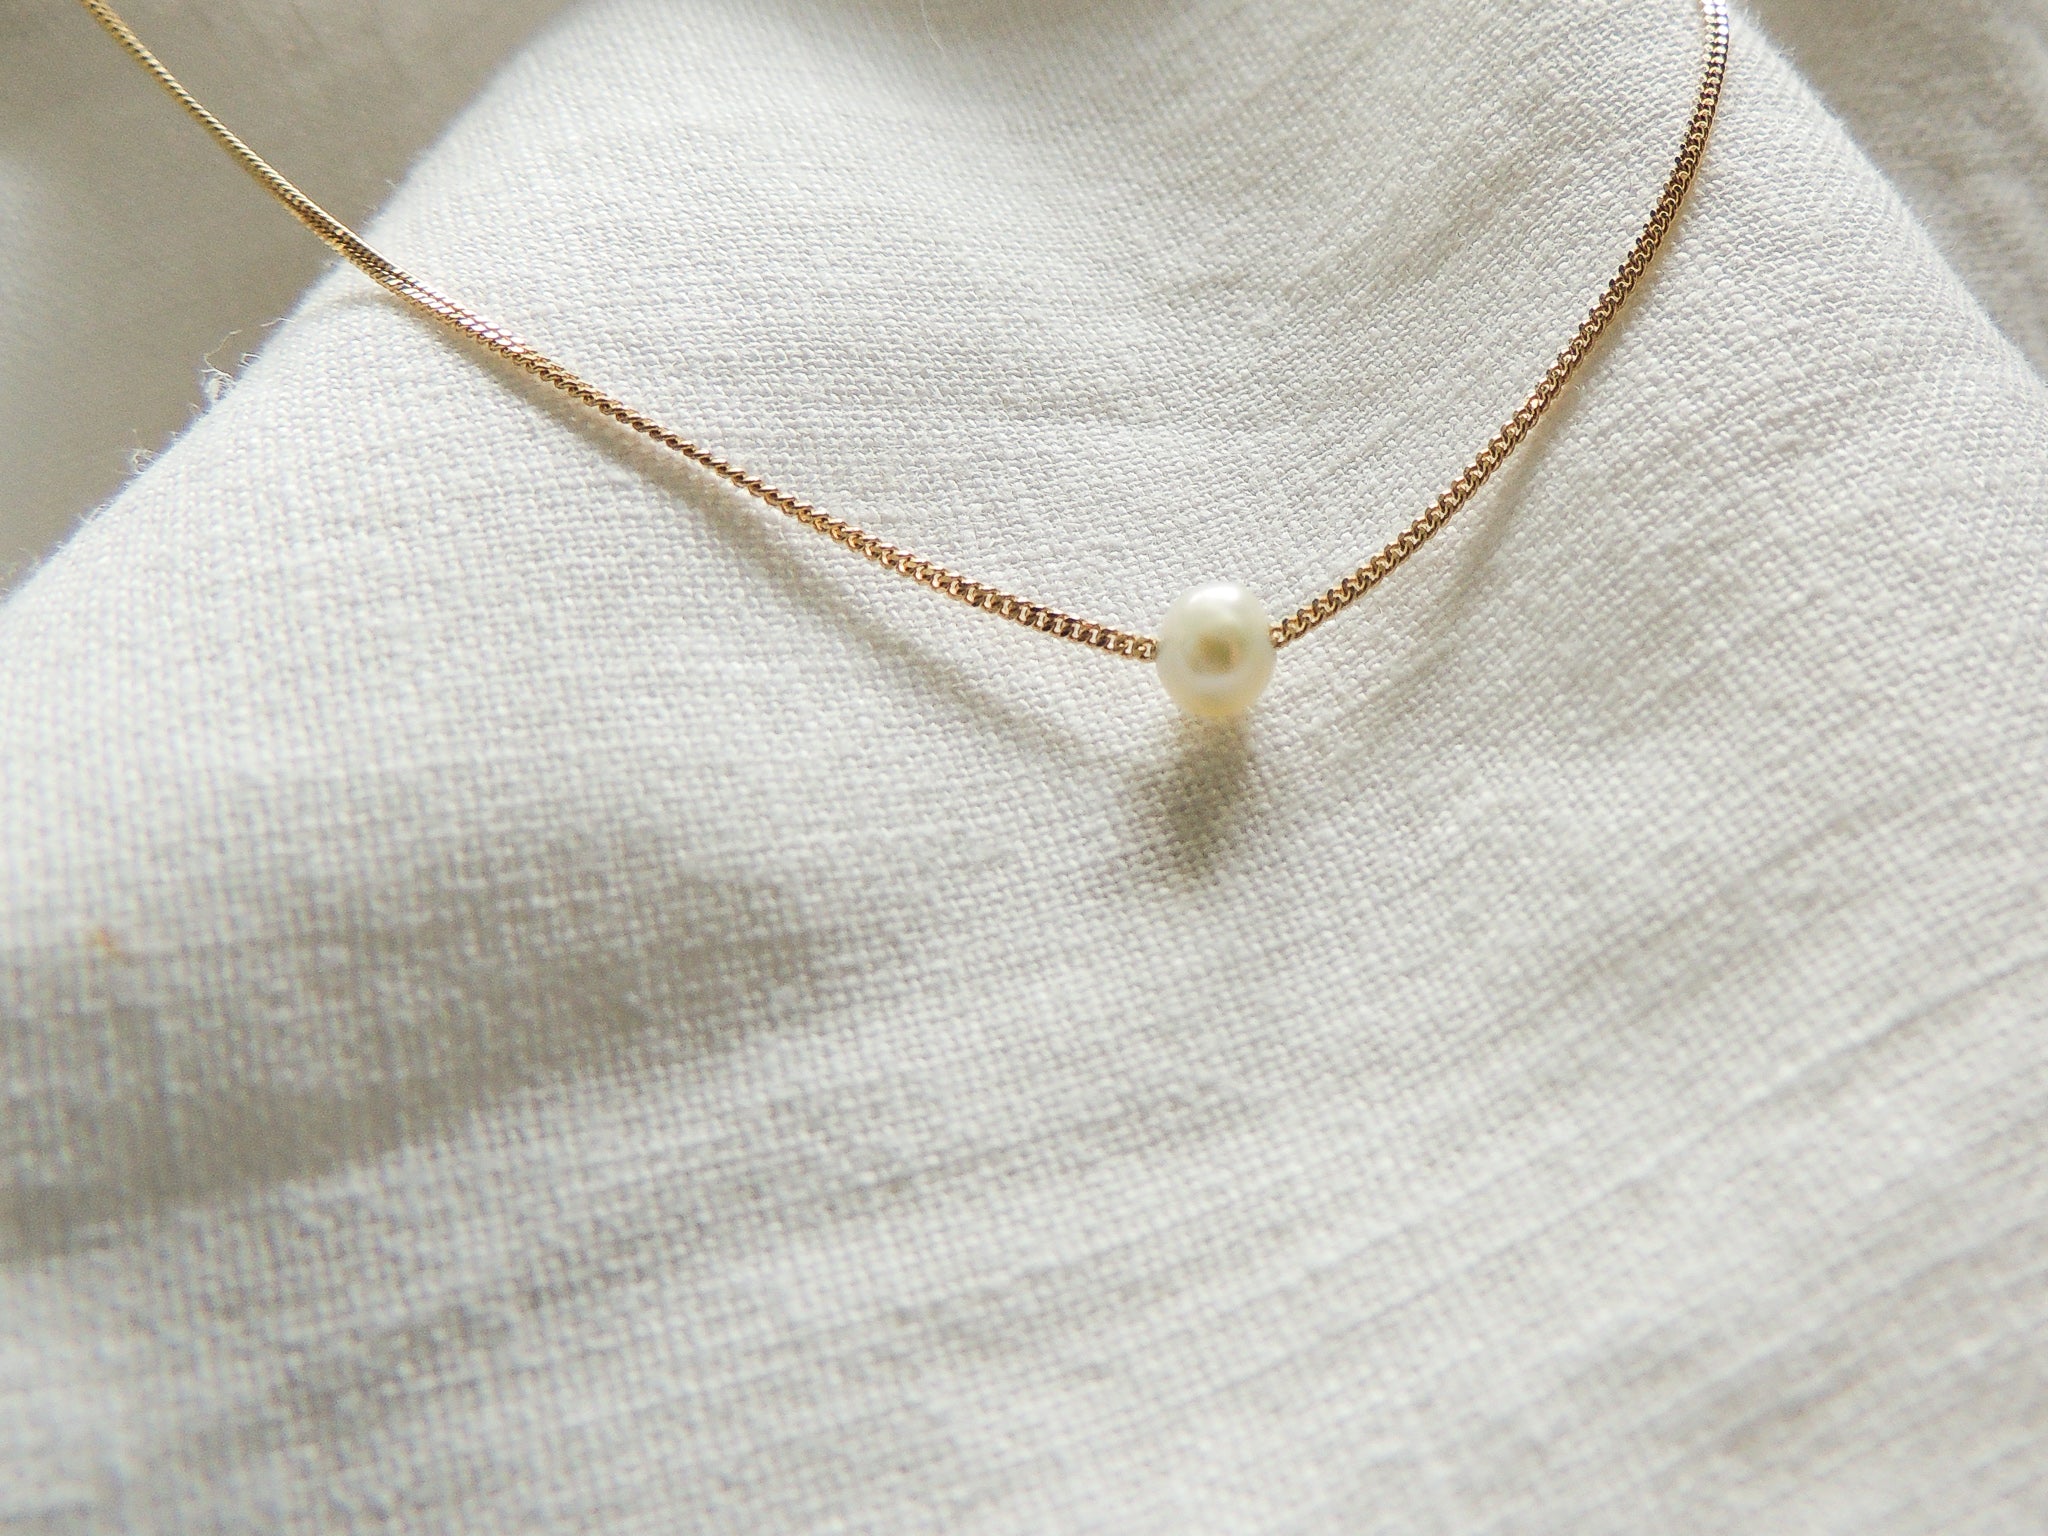 Buy 14k Solid Gold Pearl Necklace, Genuine Pearl Necklace, Dainty  Freshwater Pearl Necklace, Tiny Pearl Necklace, Wedding Jewelry Online in  India - Etsy